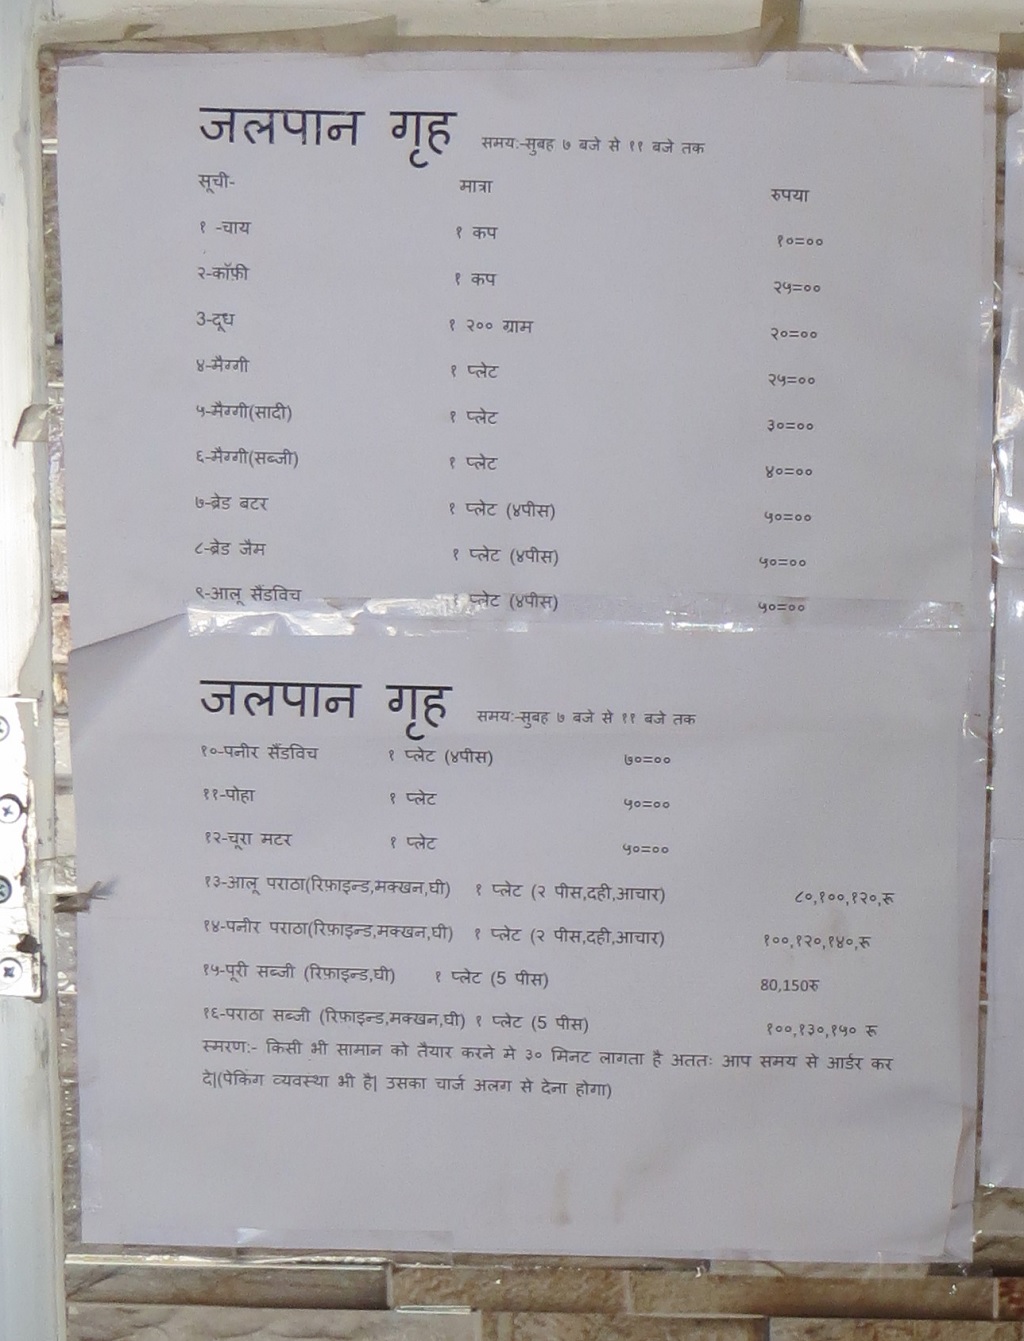 Breakfast Items (with price) Available at Jaipuria Bhawan (Chitrakoot Dham)